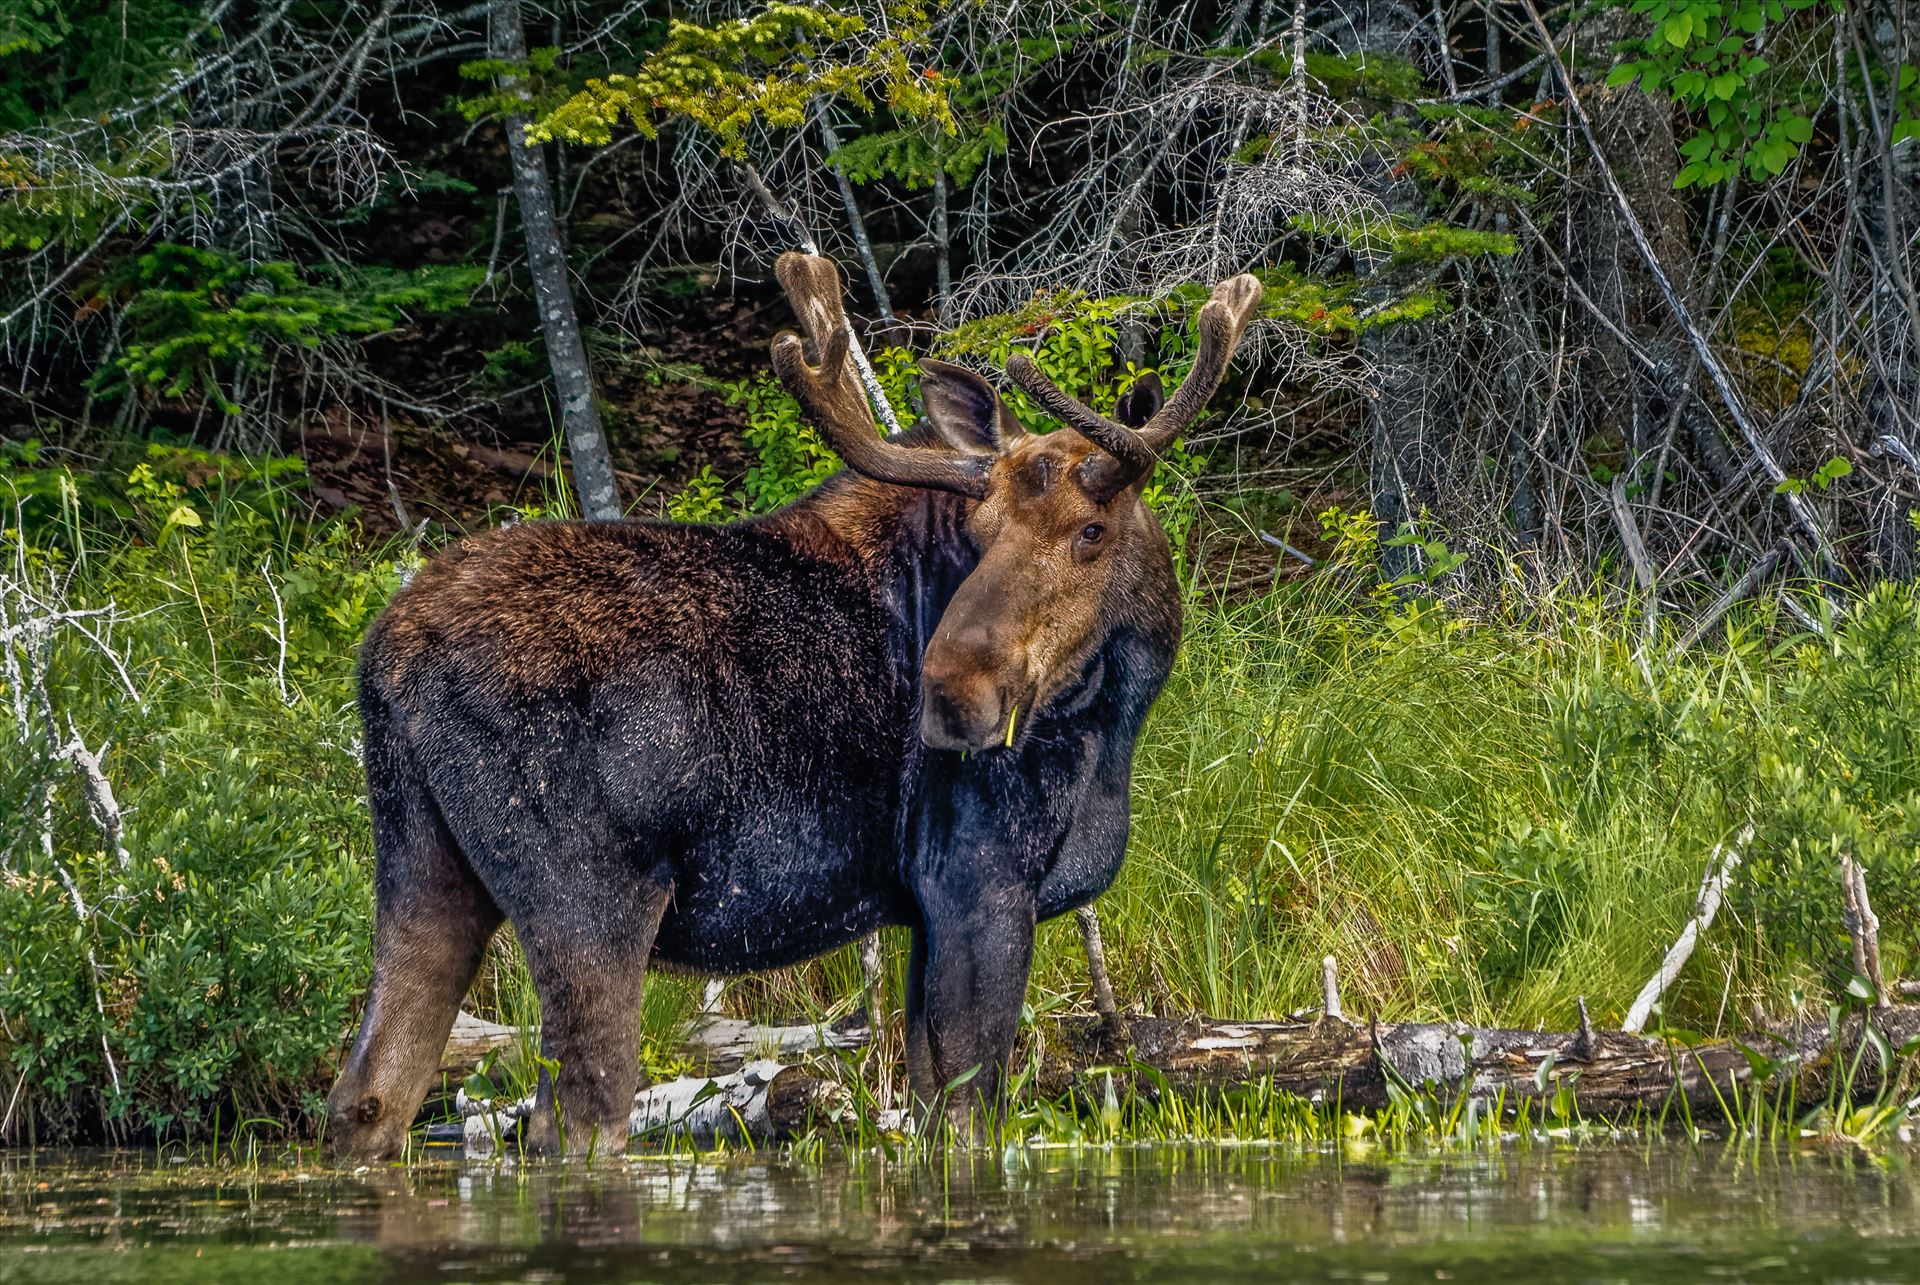 Bull Moose Taken in June 2015 in Northern Maine, USA by Buckmaster